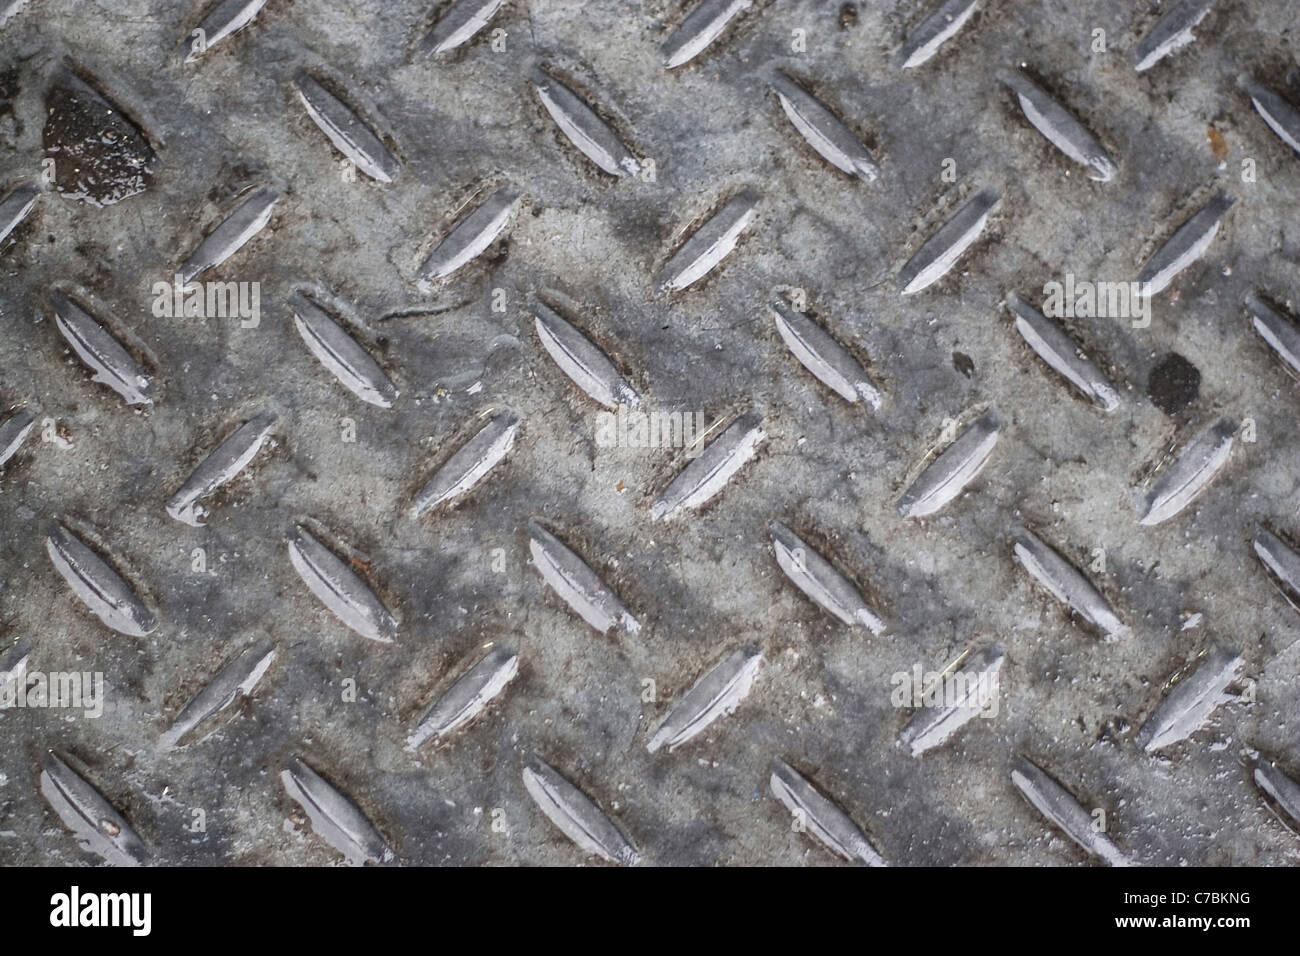 Closeup of real diamond plate material - this is a photo not an illustration. Stock Photo